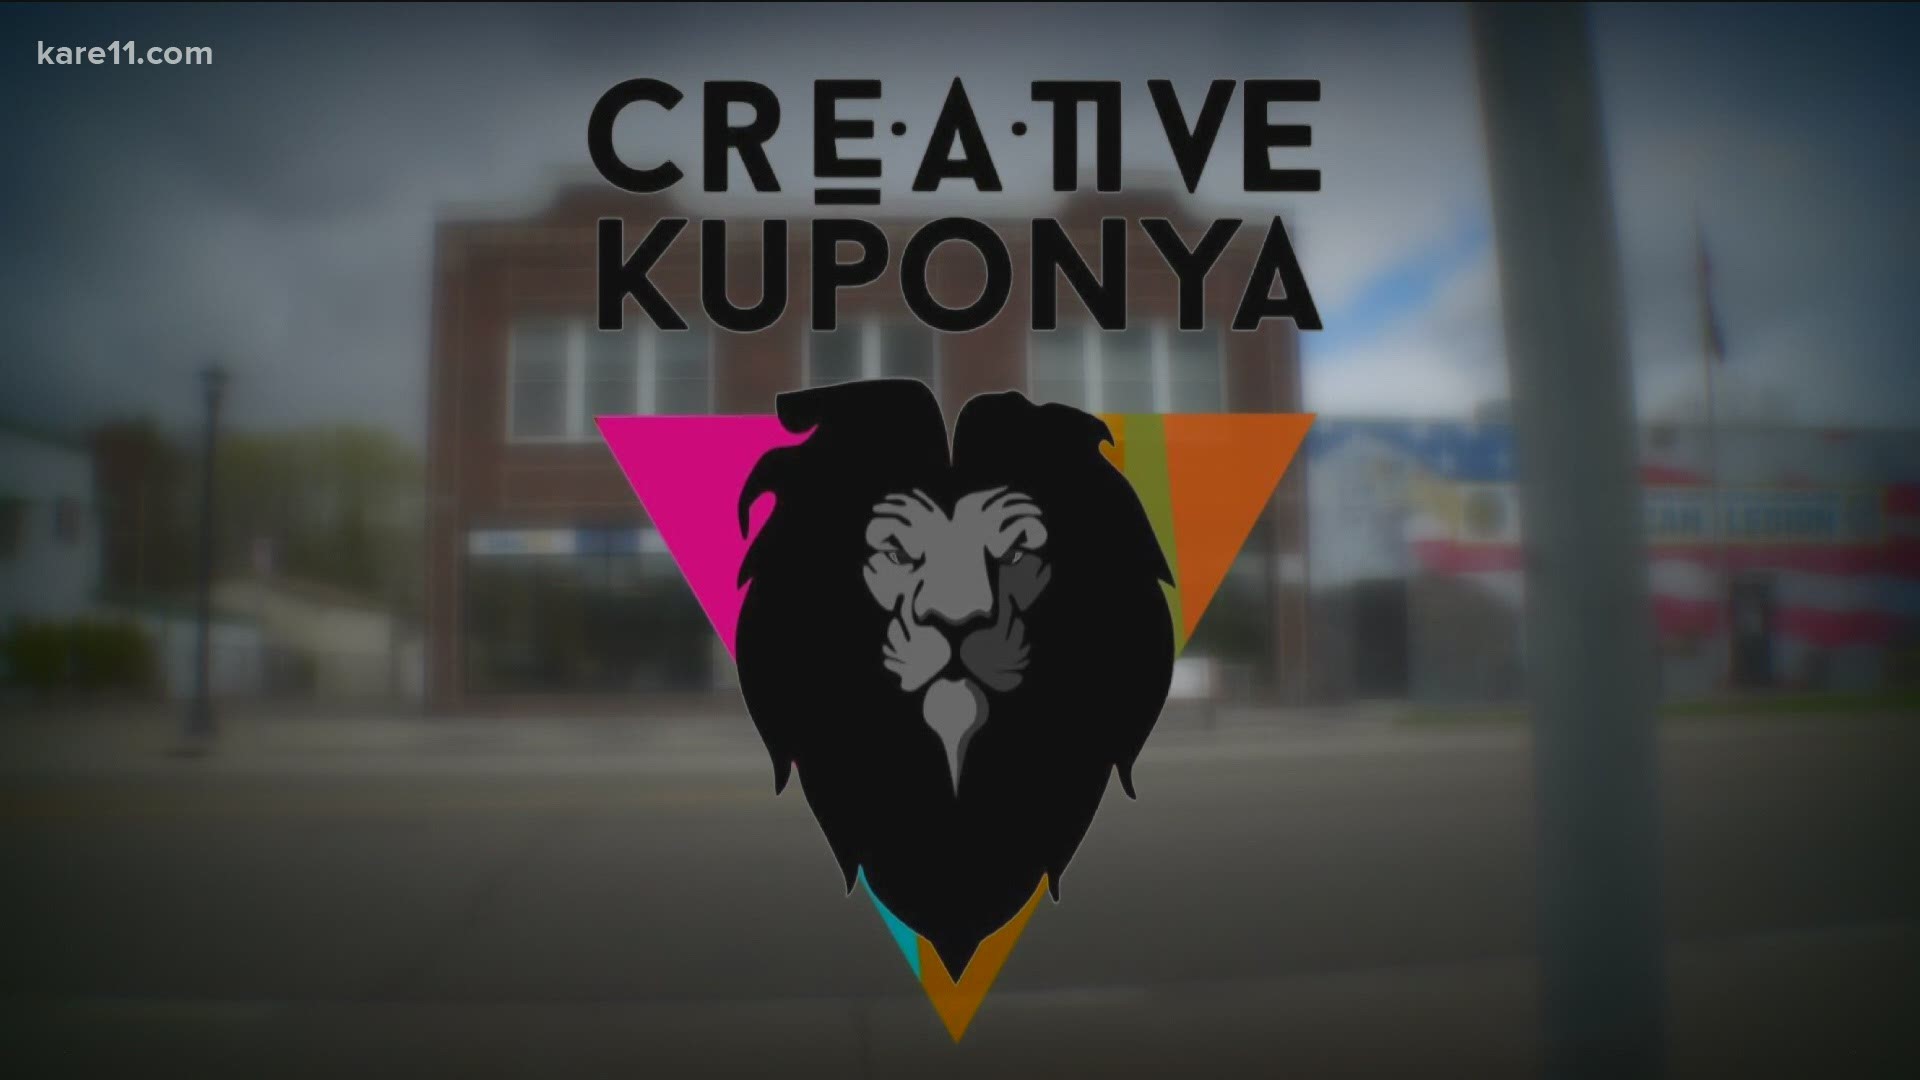 Therapists at Creative Kuponya are providing emotional help for those struggling amidst the turmoil surrounding the Derek Chauvin trial and Daunte Wright's death.